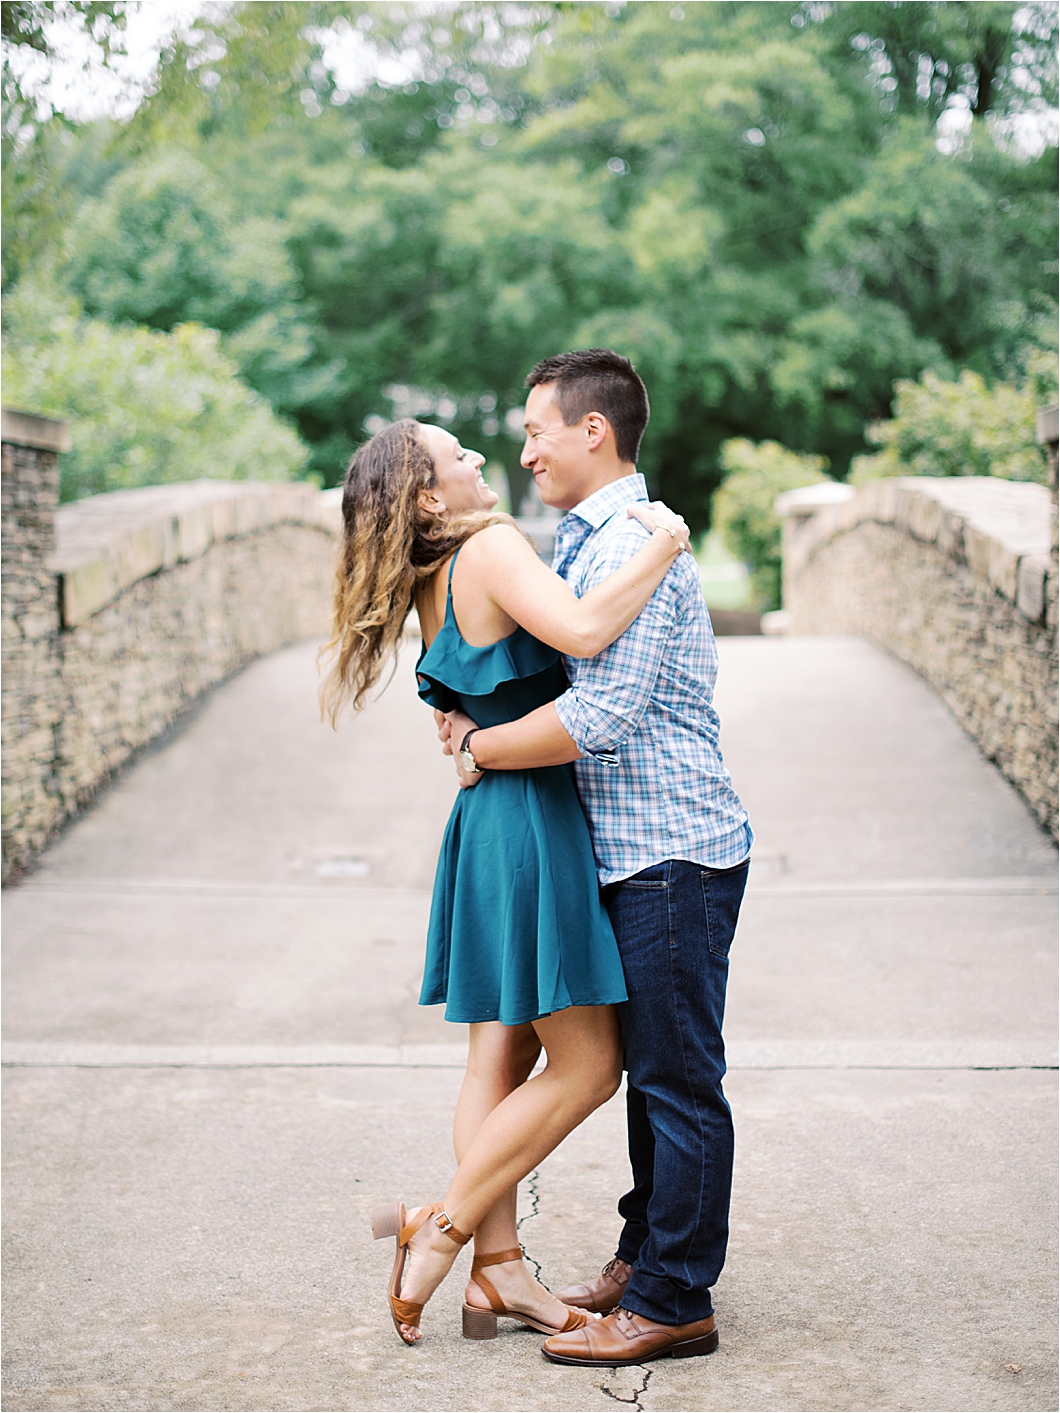 Downtown Charlotte Freedom Park Engagement Photos by Hillary Muelleck